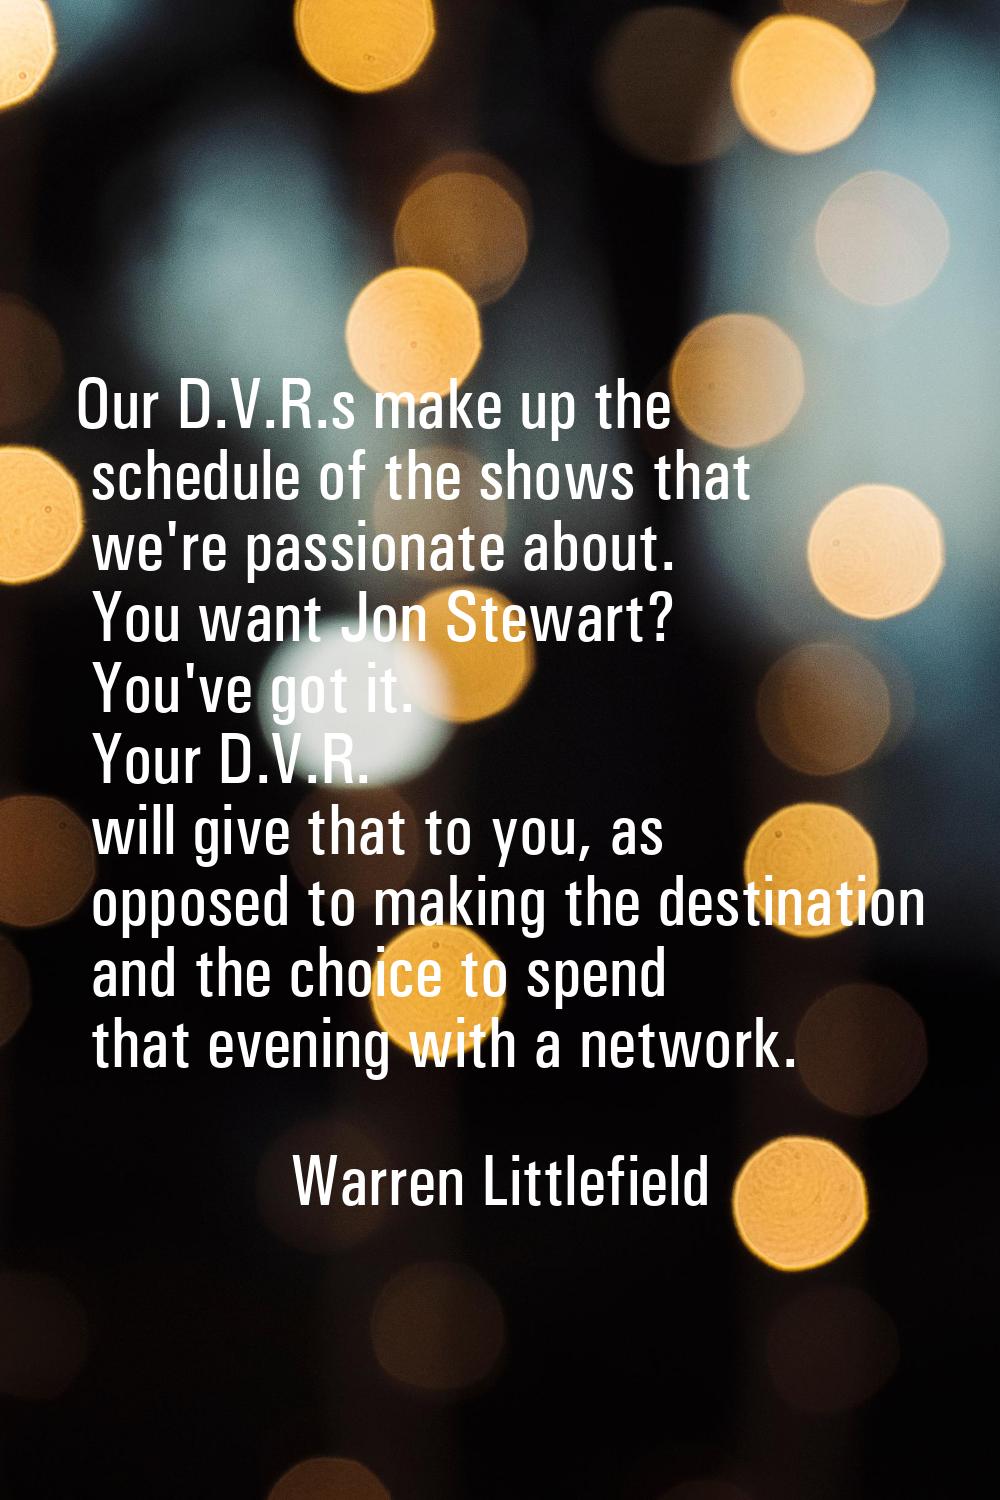 Our D.V.R.s make up the schedule of the shows that we're passionate about. You want Jon Stewart? Yo